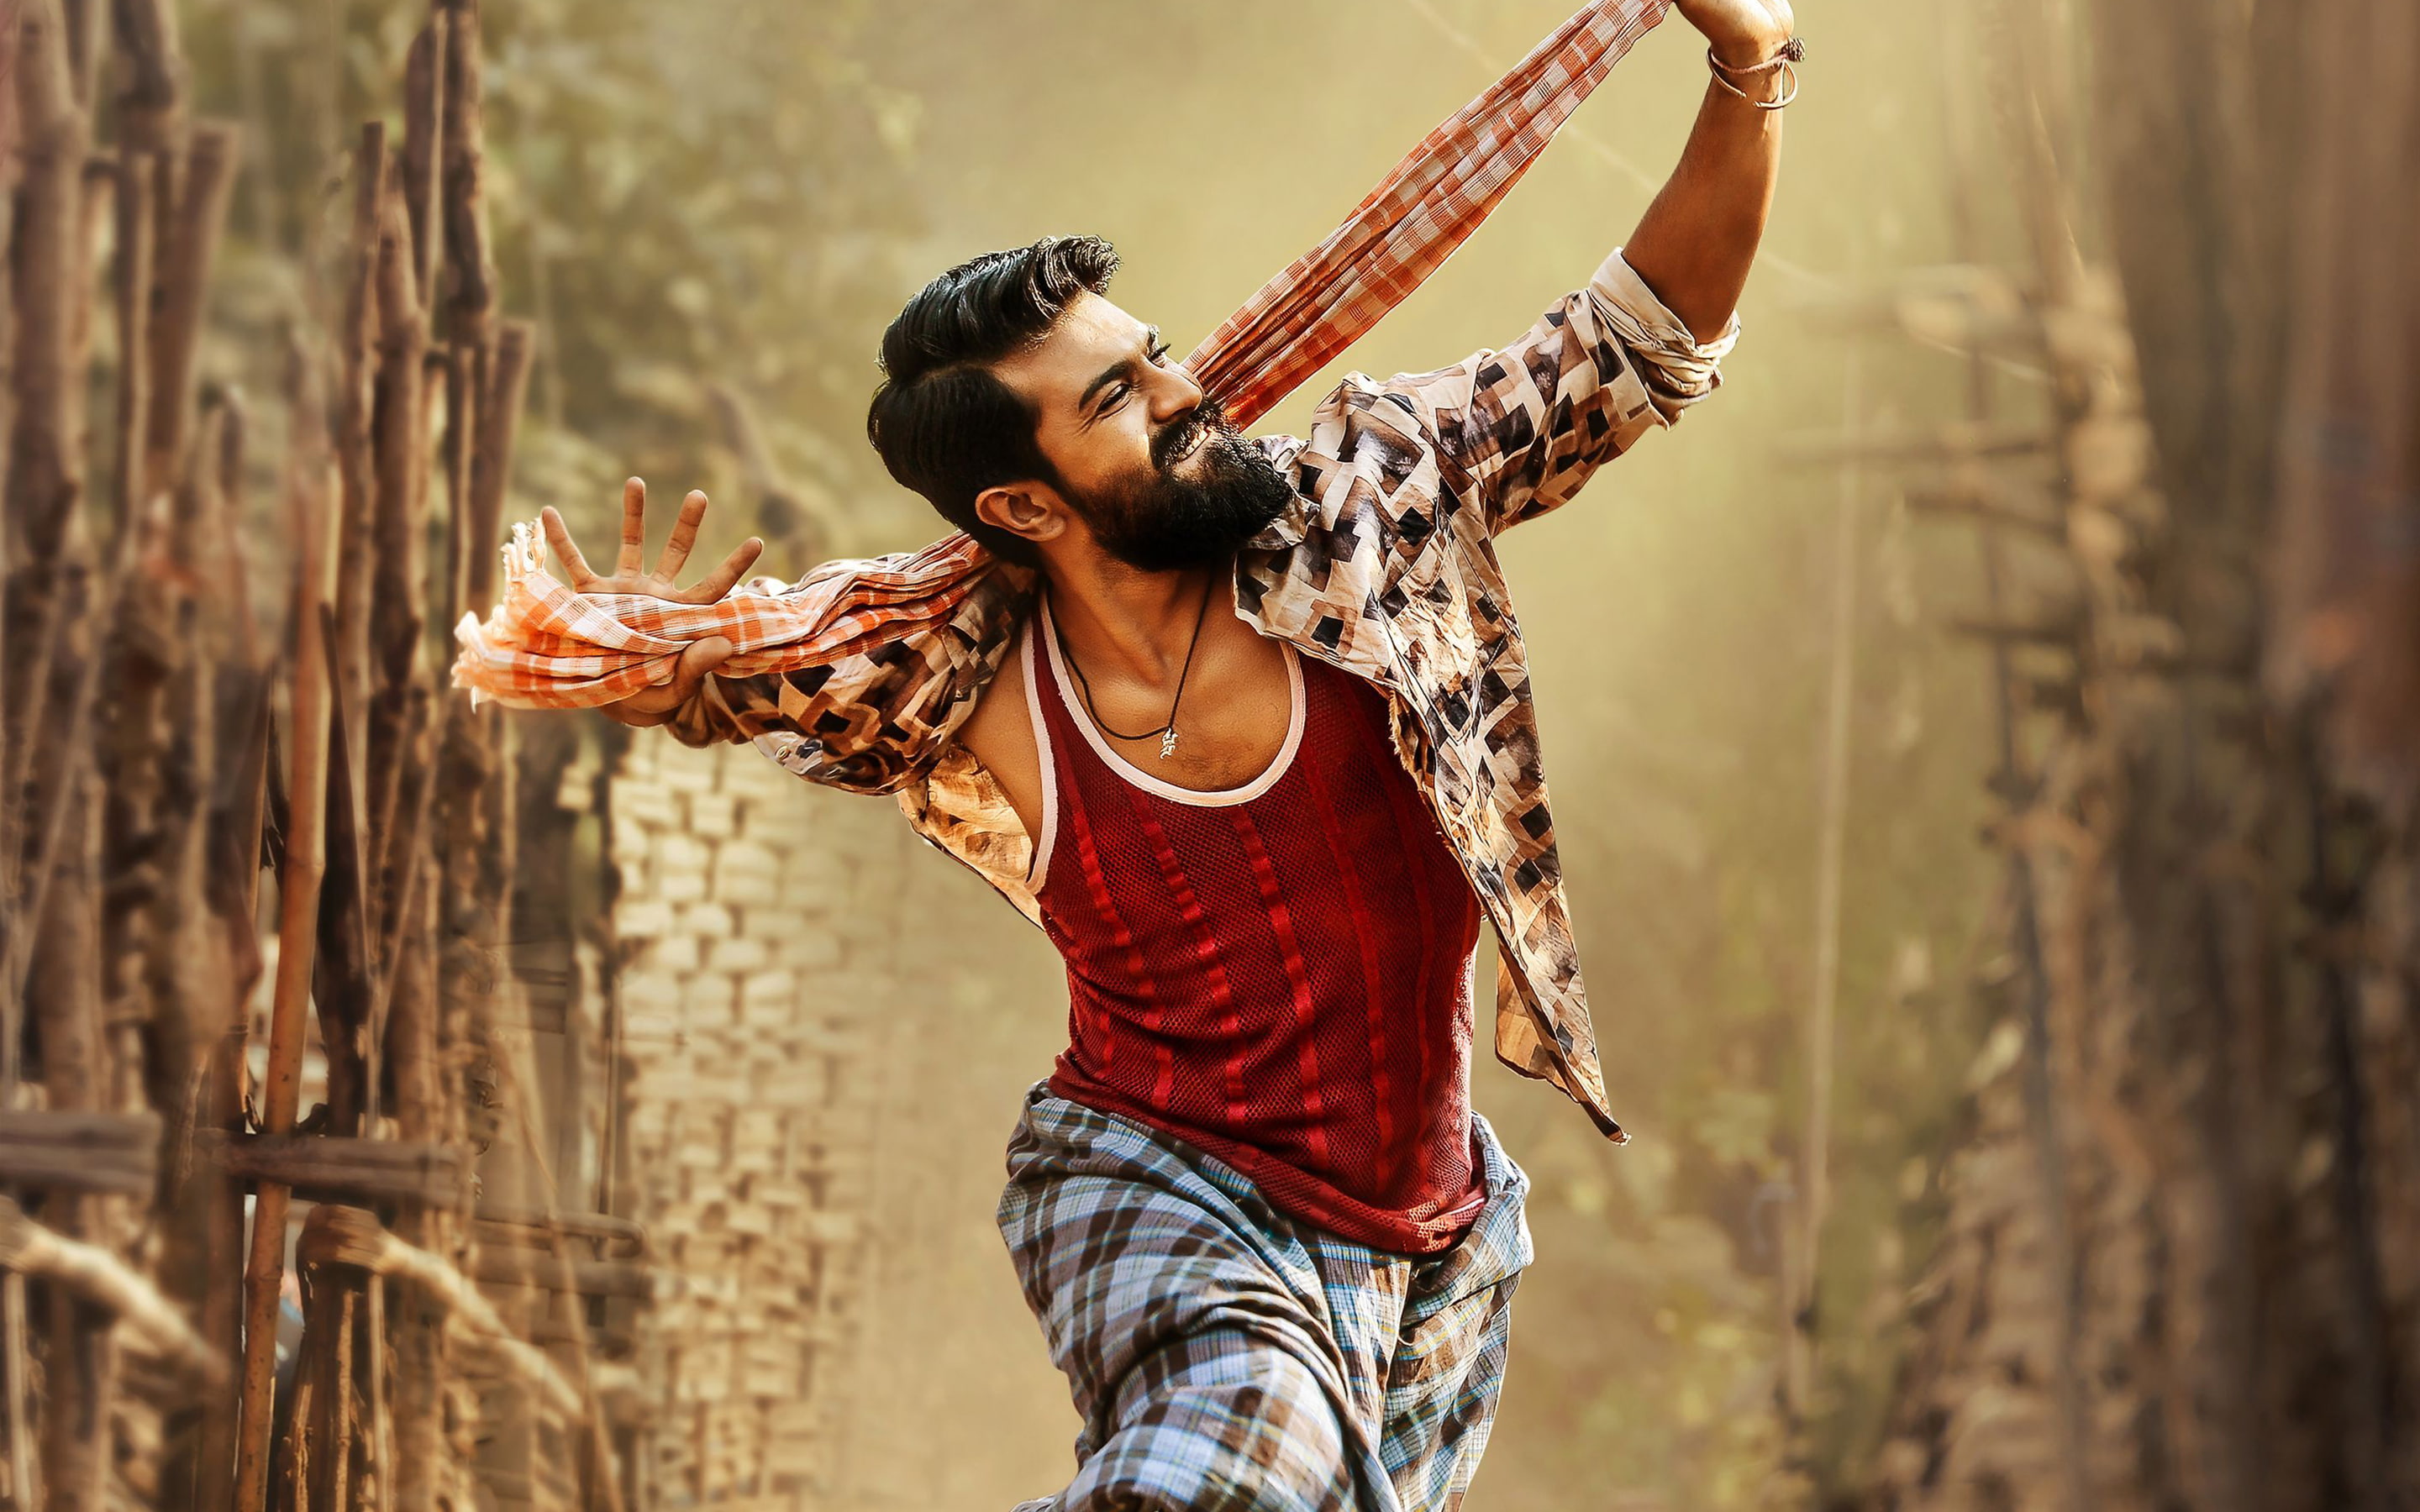 Ram Charan in Rangasthalam, one person, real people, casual clothing